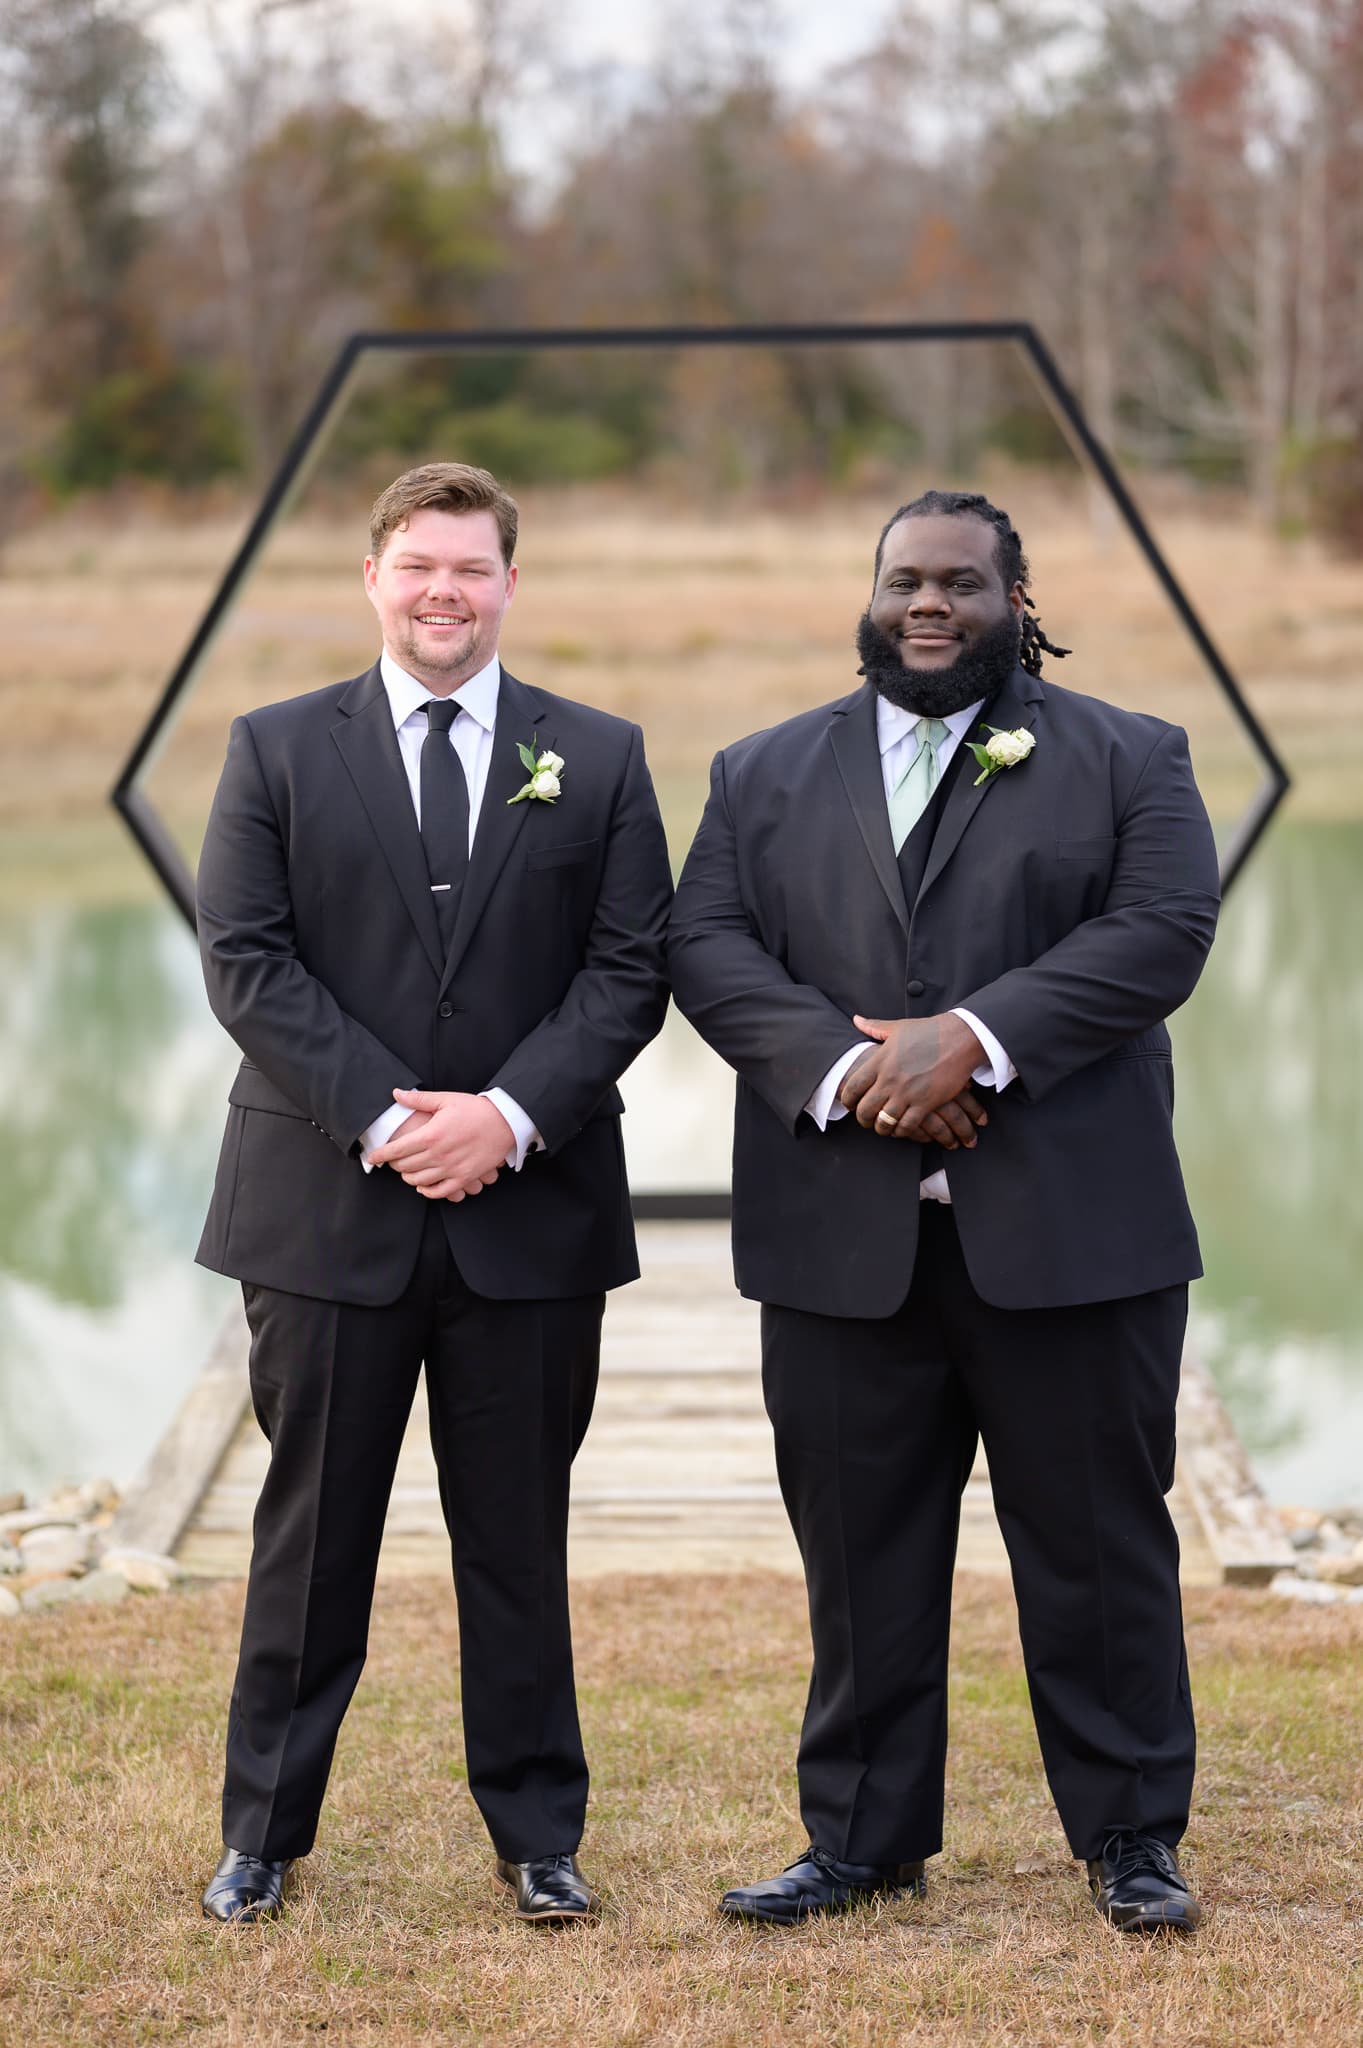 Groom with his brother - The Venue at White Oaks Farm